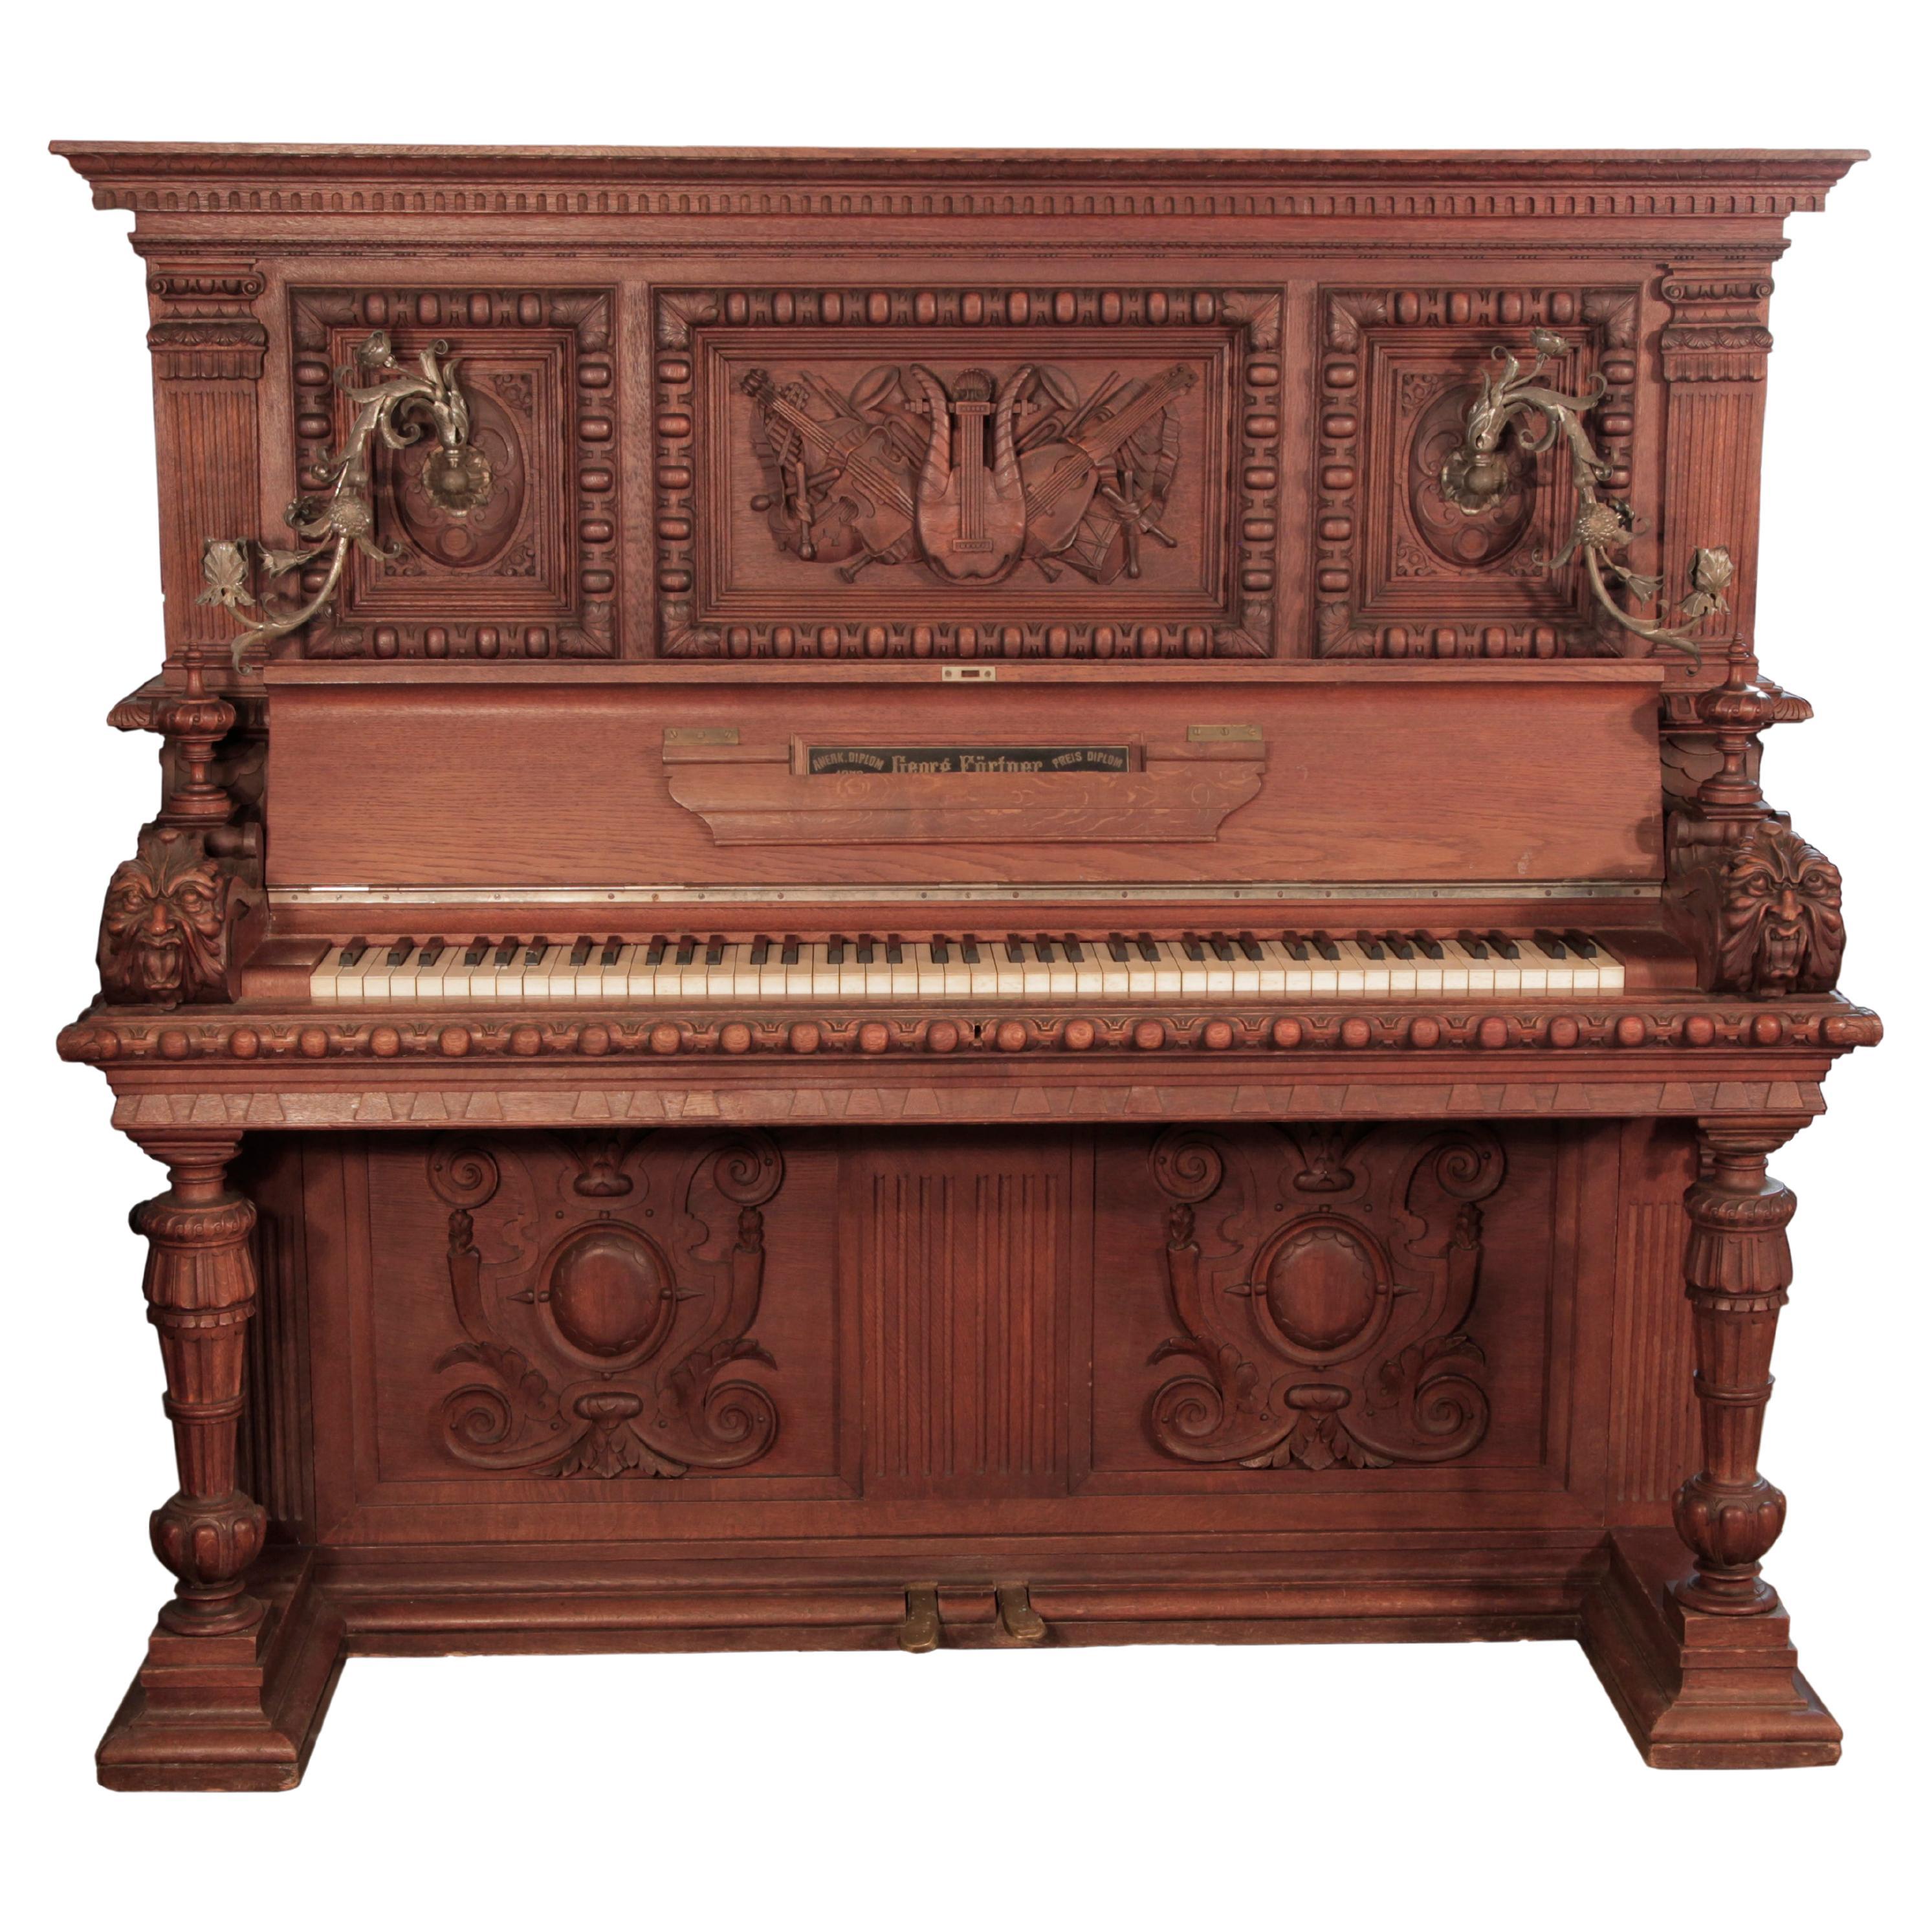 Georg Fortner Upright Piano Mahogany High Relief Carvings by Julius Bechler